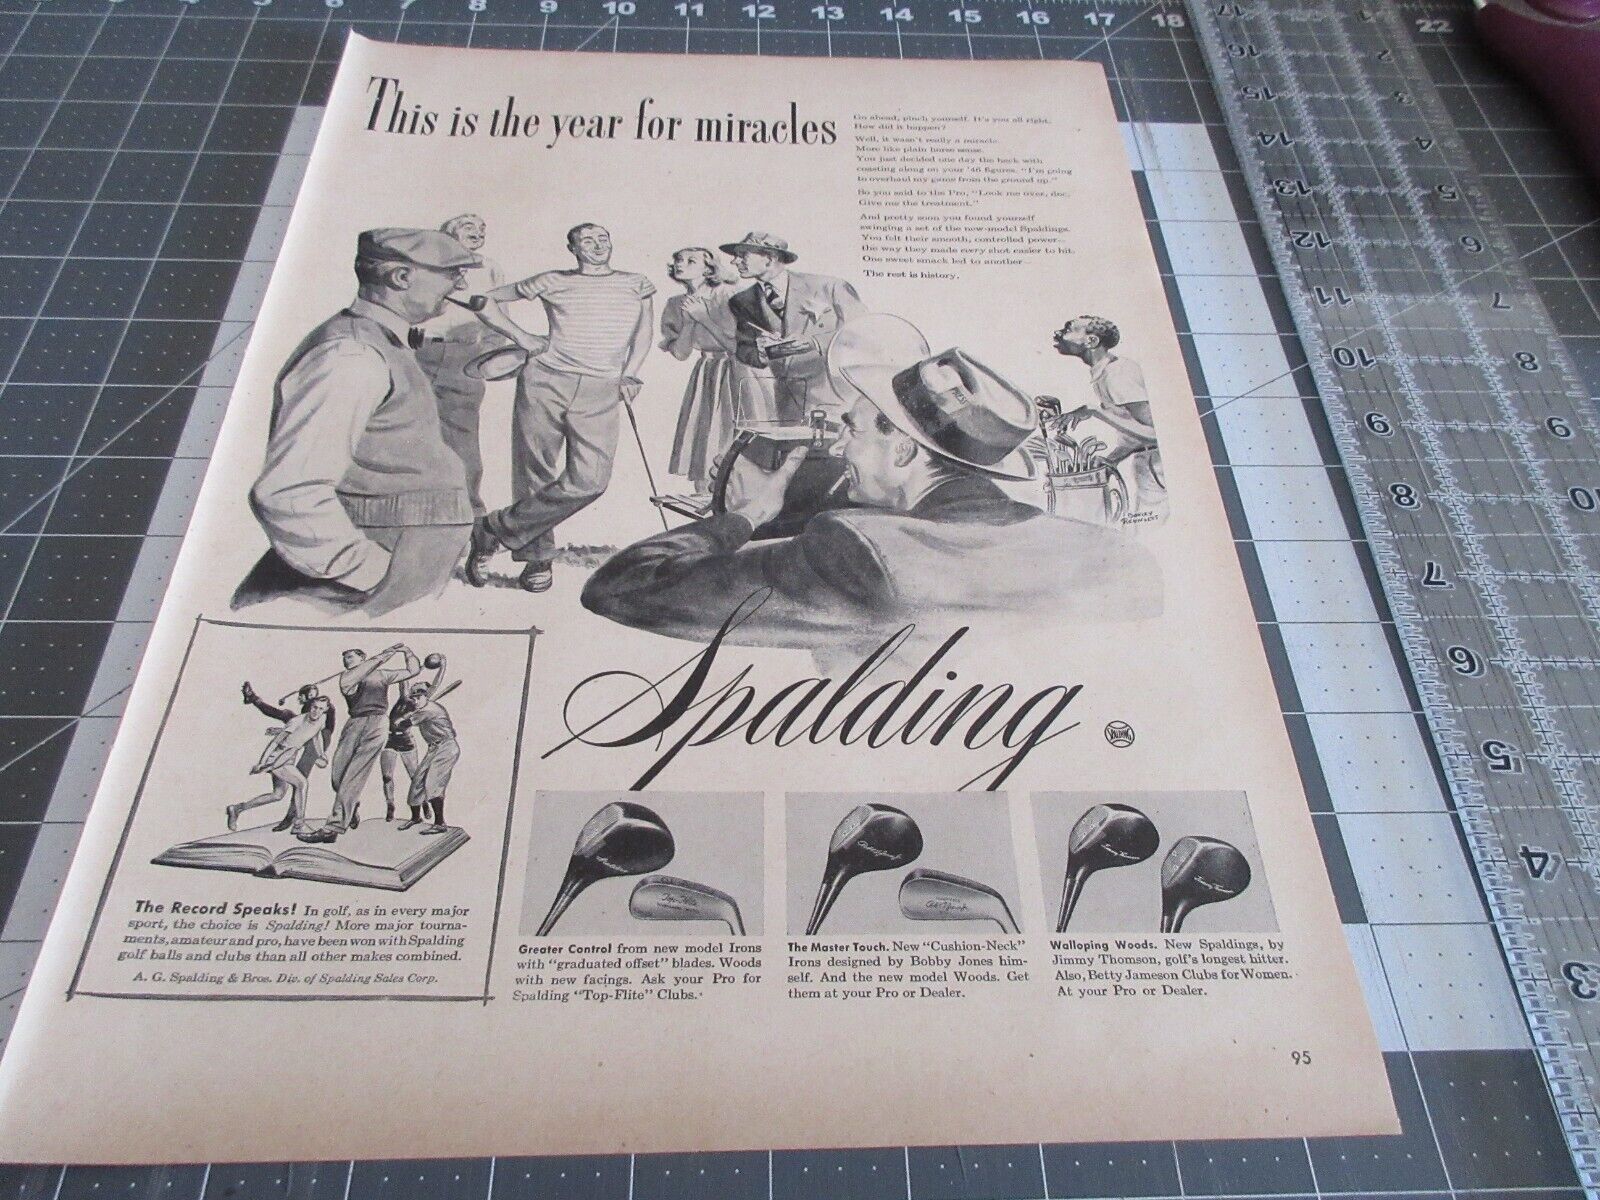 1947 Spalding Golf Clubs, Year for Miracles Vintage Print Ad